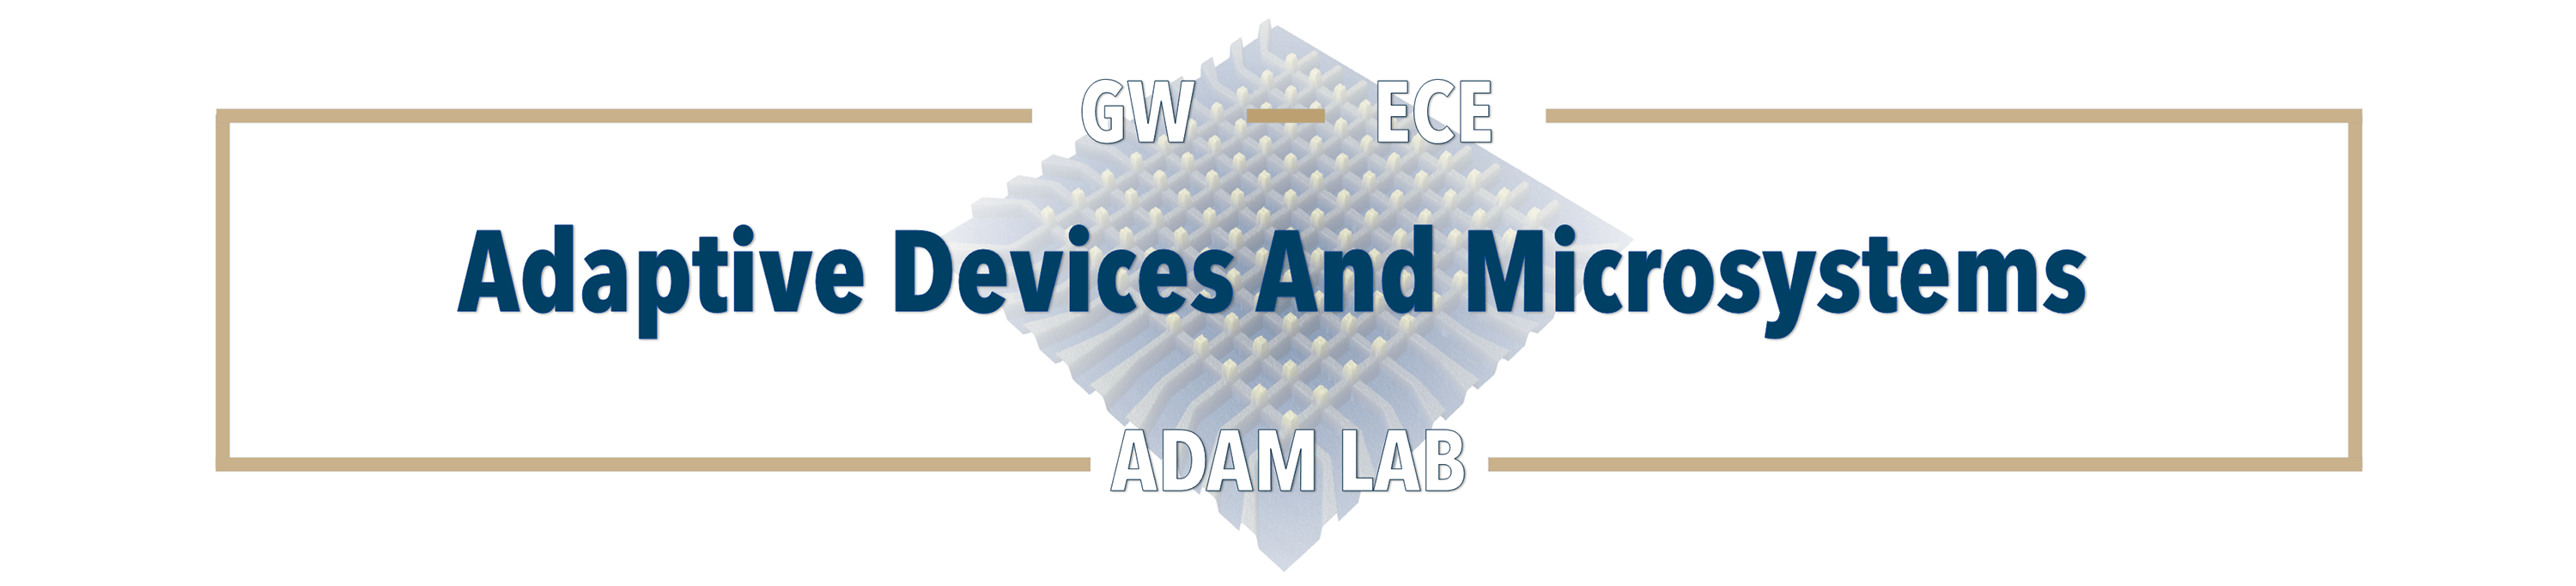 Adaptive Devices and Microsystems – GW ECE Adam Lab